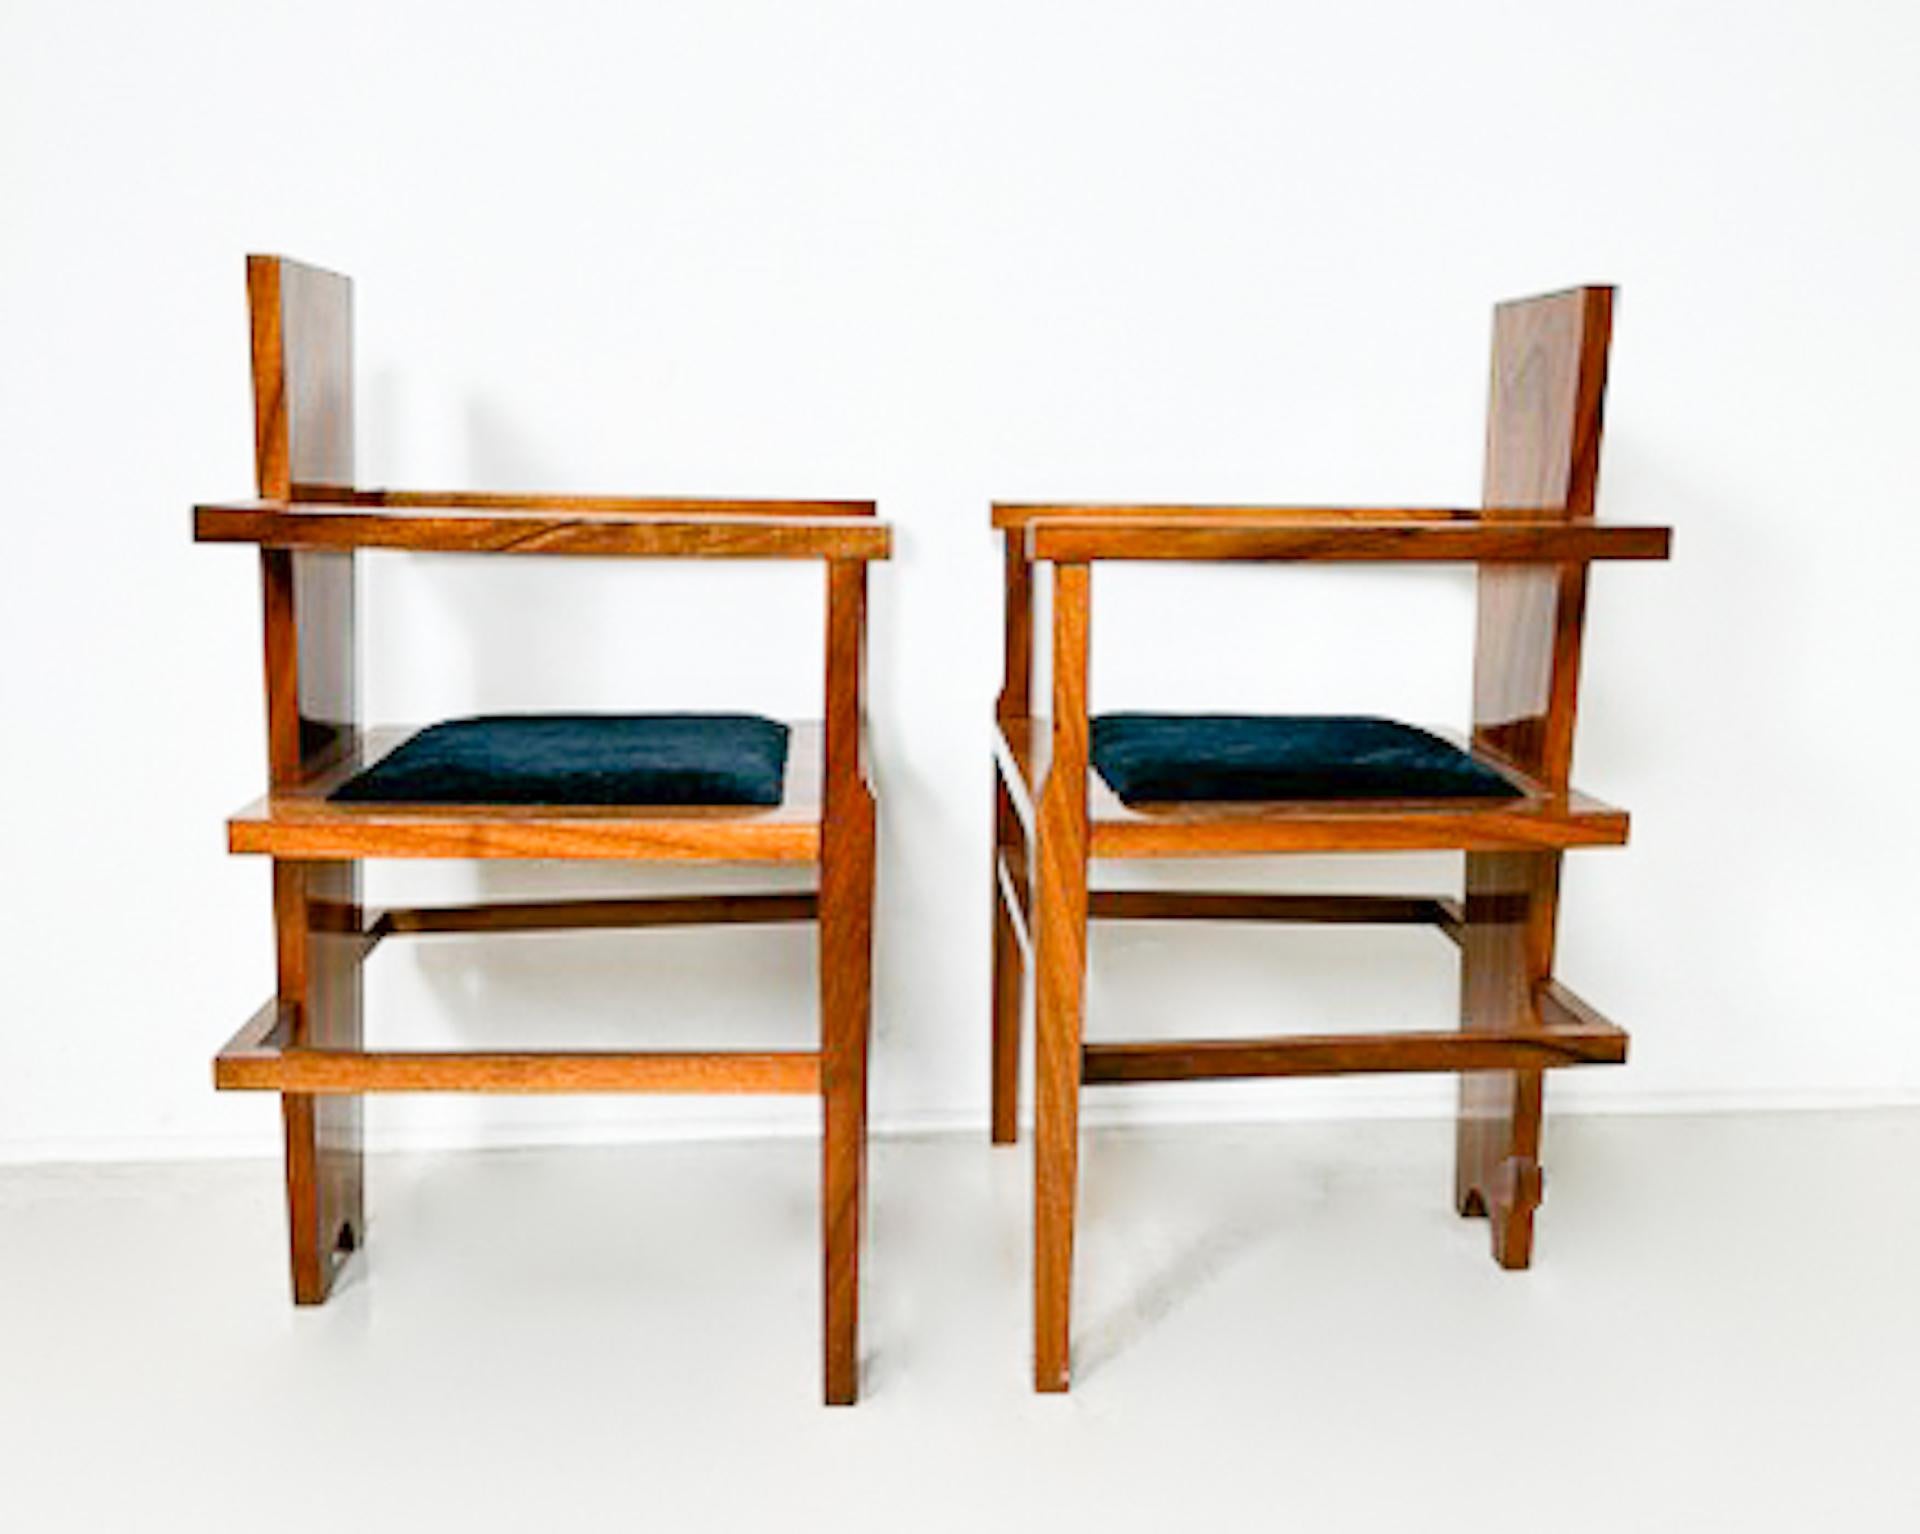 Pair of Constructivist Walnut Armchairs, 1940s For Sale 5